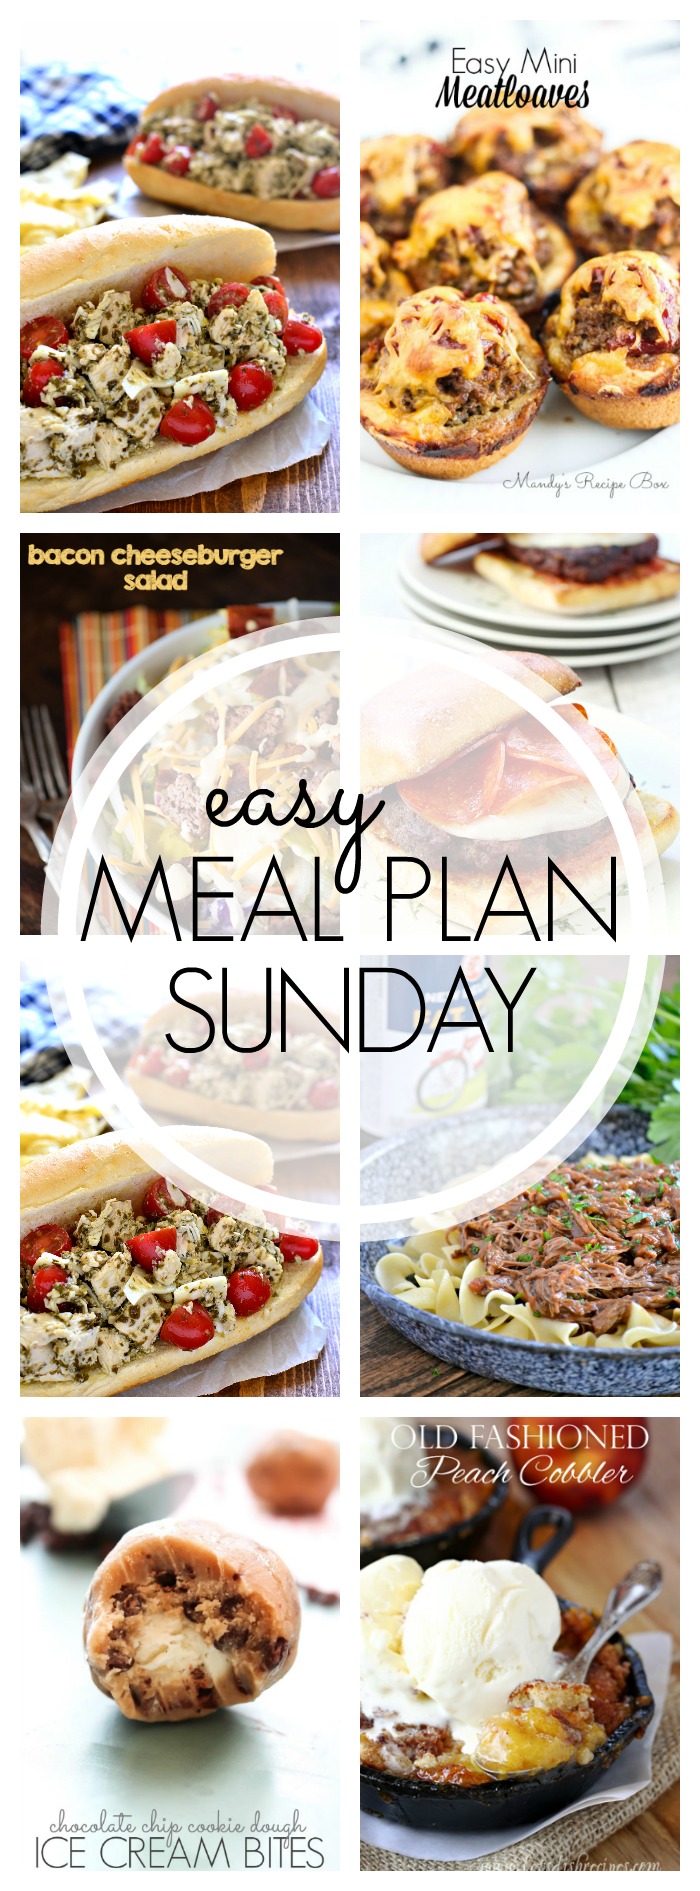 Easy Meal Plan Sunday #57